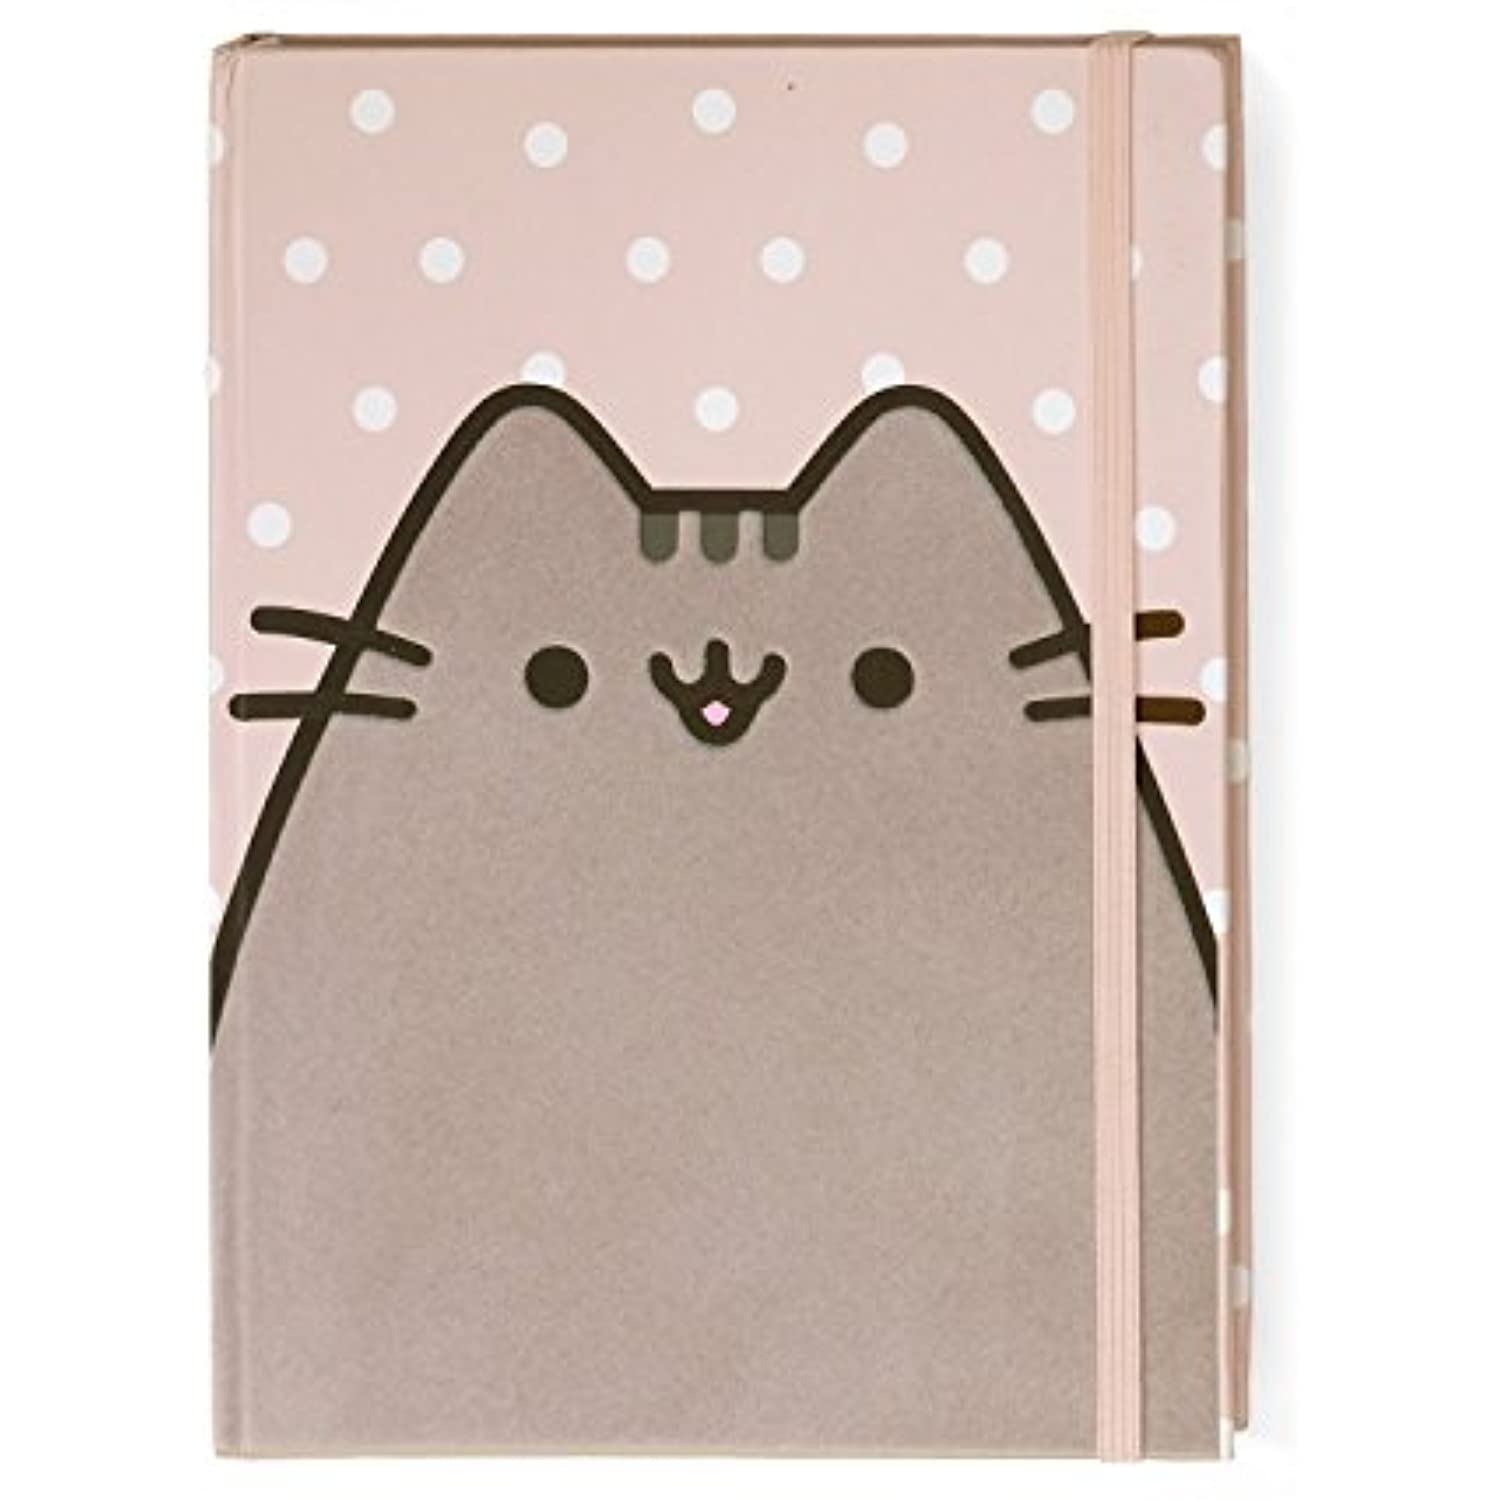 Pusheen GUND Tabby Cat Accessory Case Bundle with Pink Polka Dot Notebook, School Accessories Set for Students Teens Boys and Girls